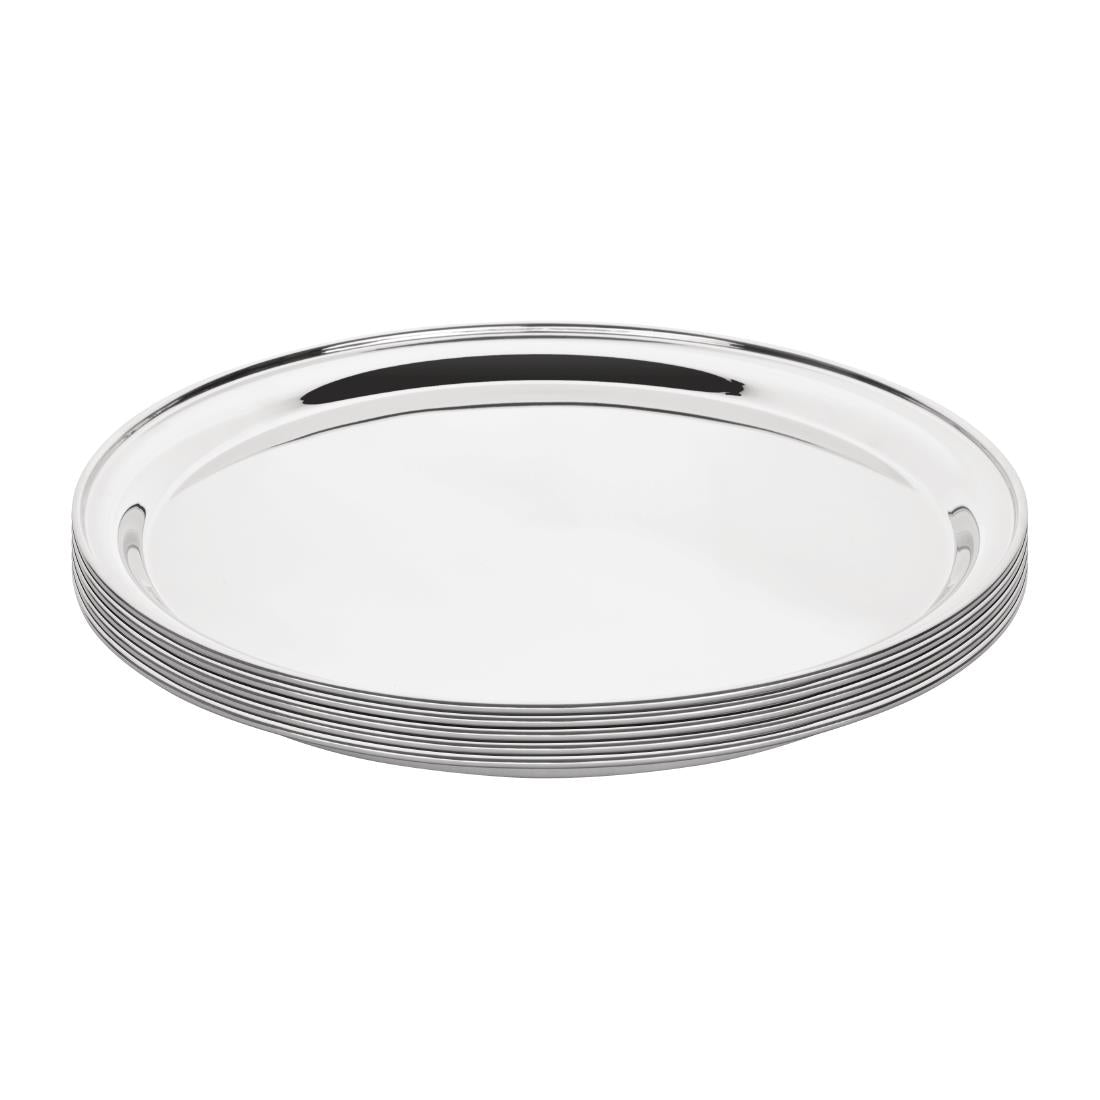 J828 Olympia Stainless Steel Round Service Tray 305mm